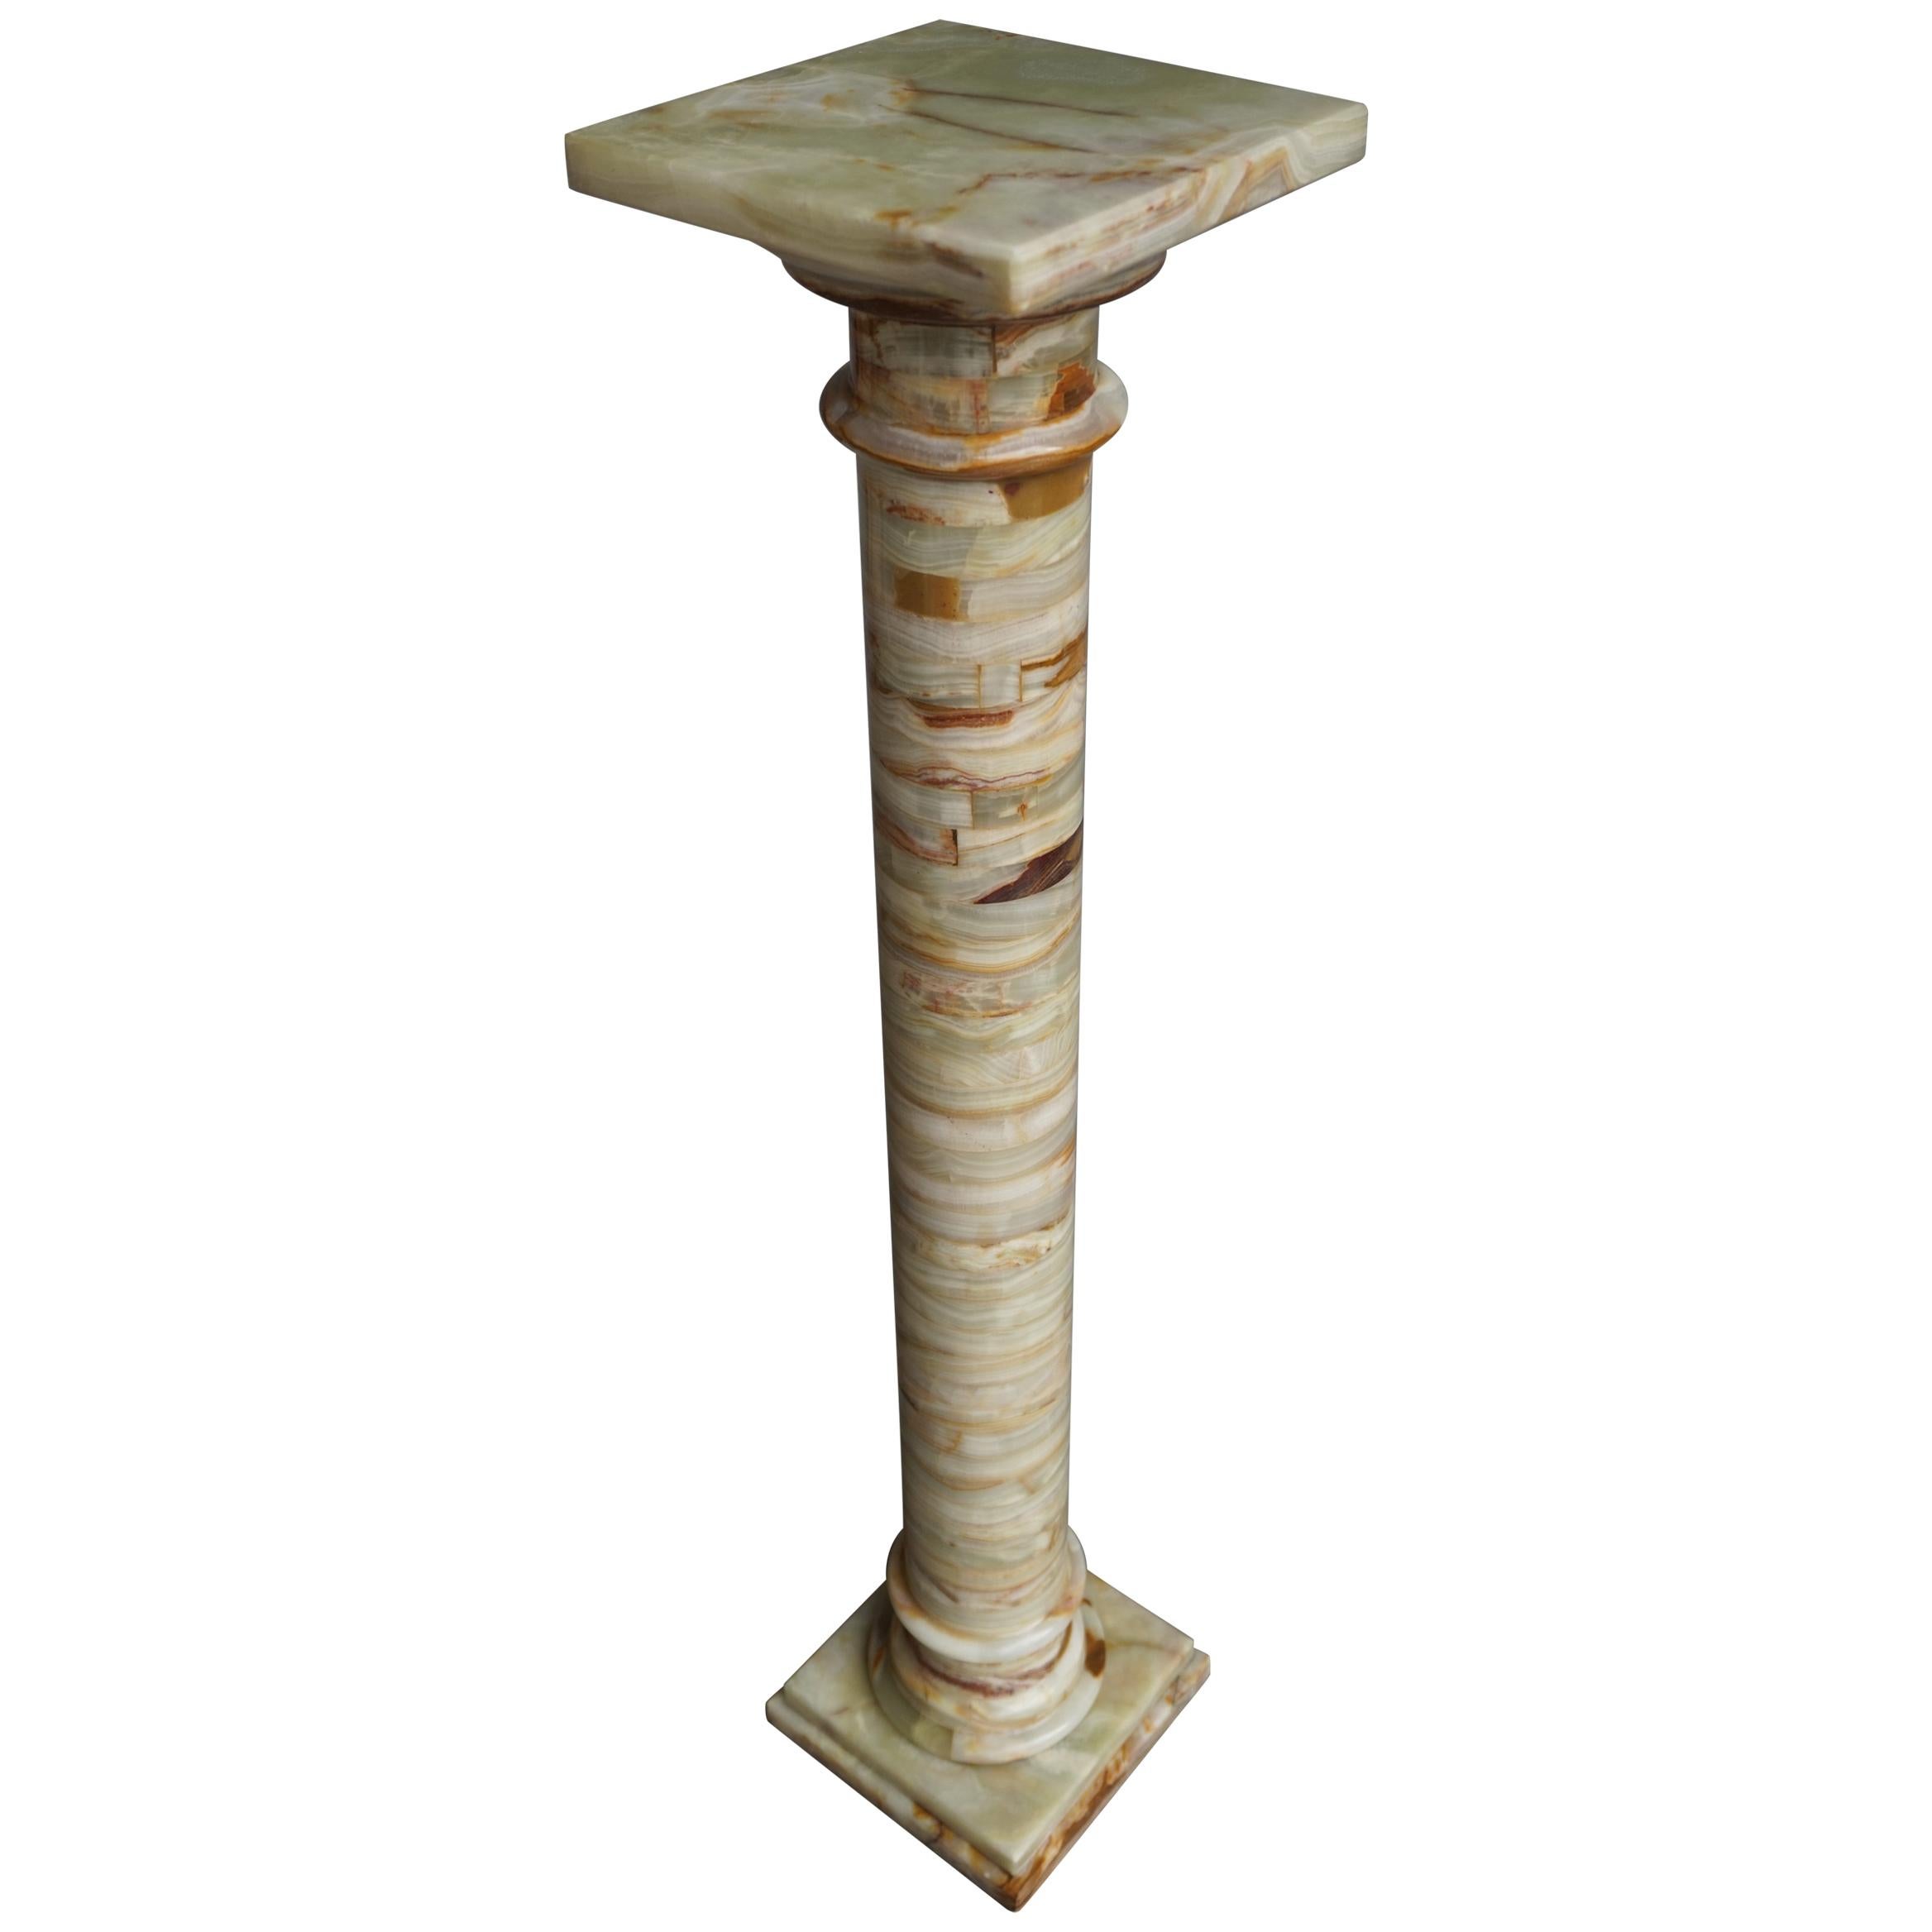 Stylish, colorful and top quality workmanship Italian column.

This classical Italian design stand is all handcrafted with nothing but solid onyx in the most beautiful colors. The timeless, Tuscan design makes this vintage stand suitable for all